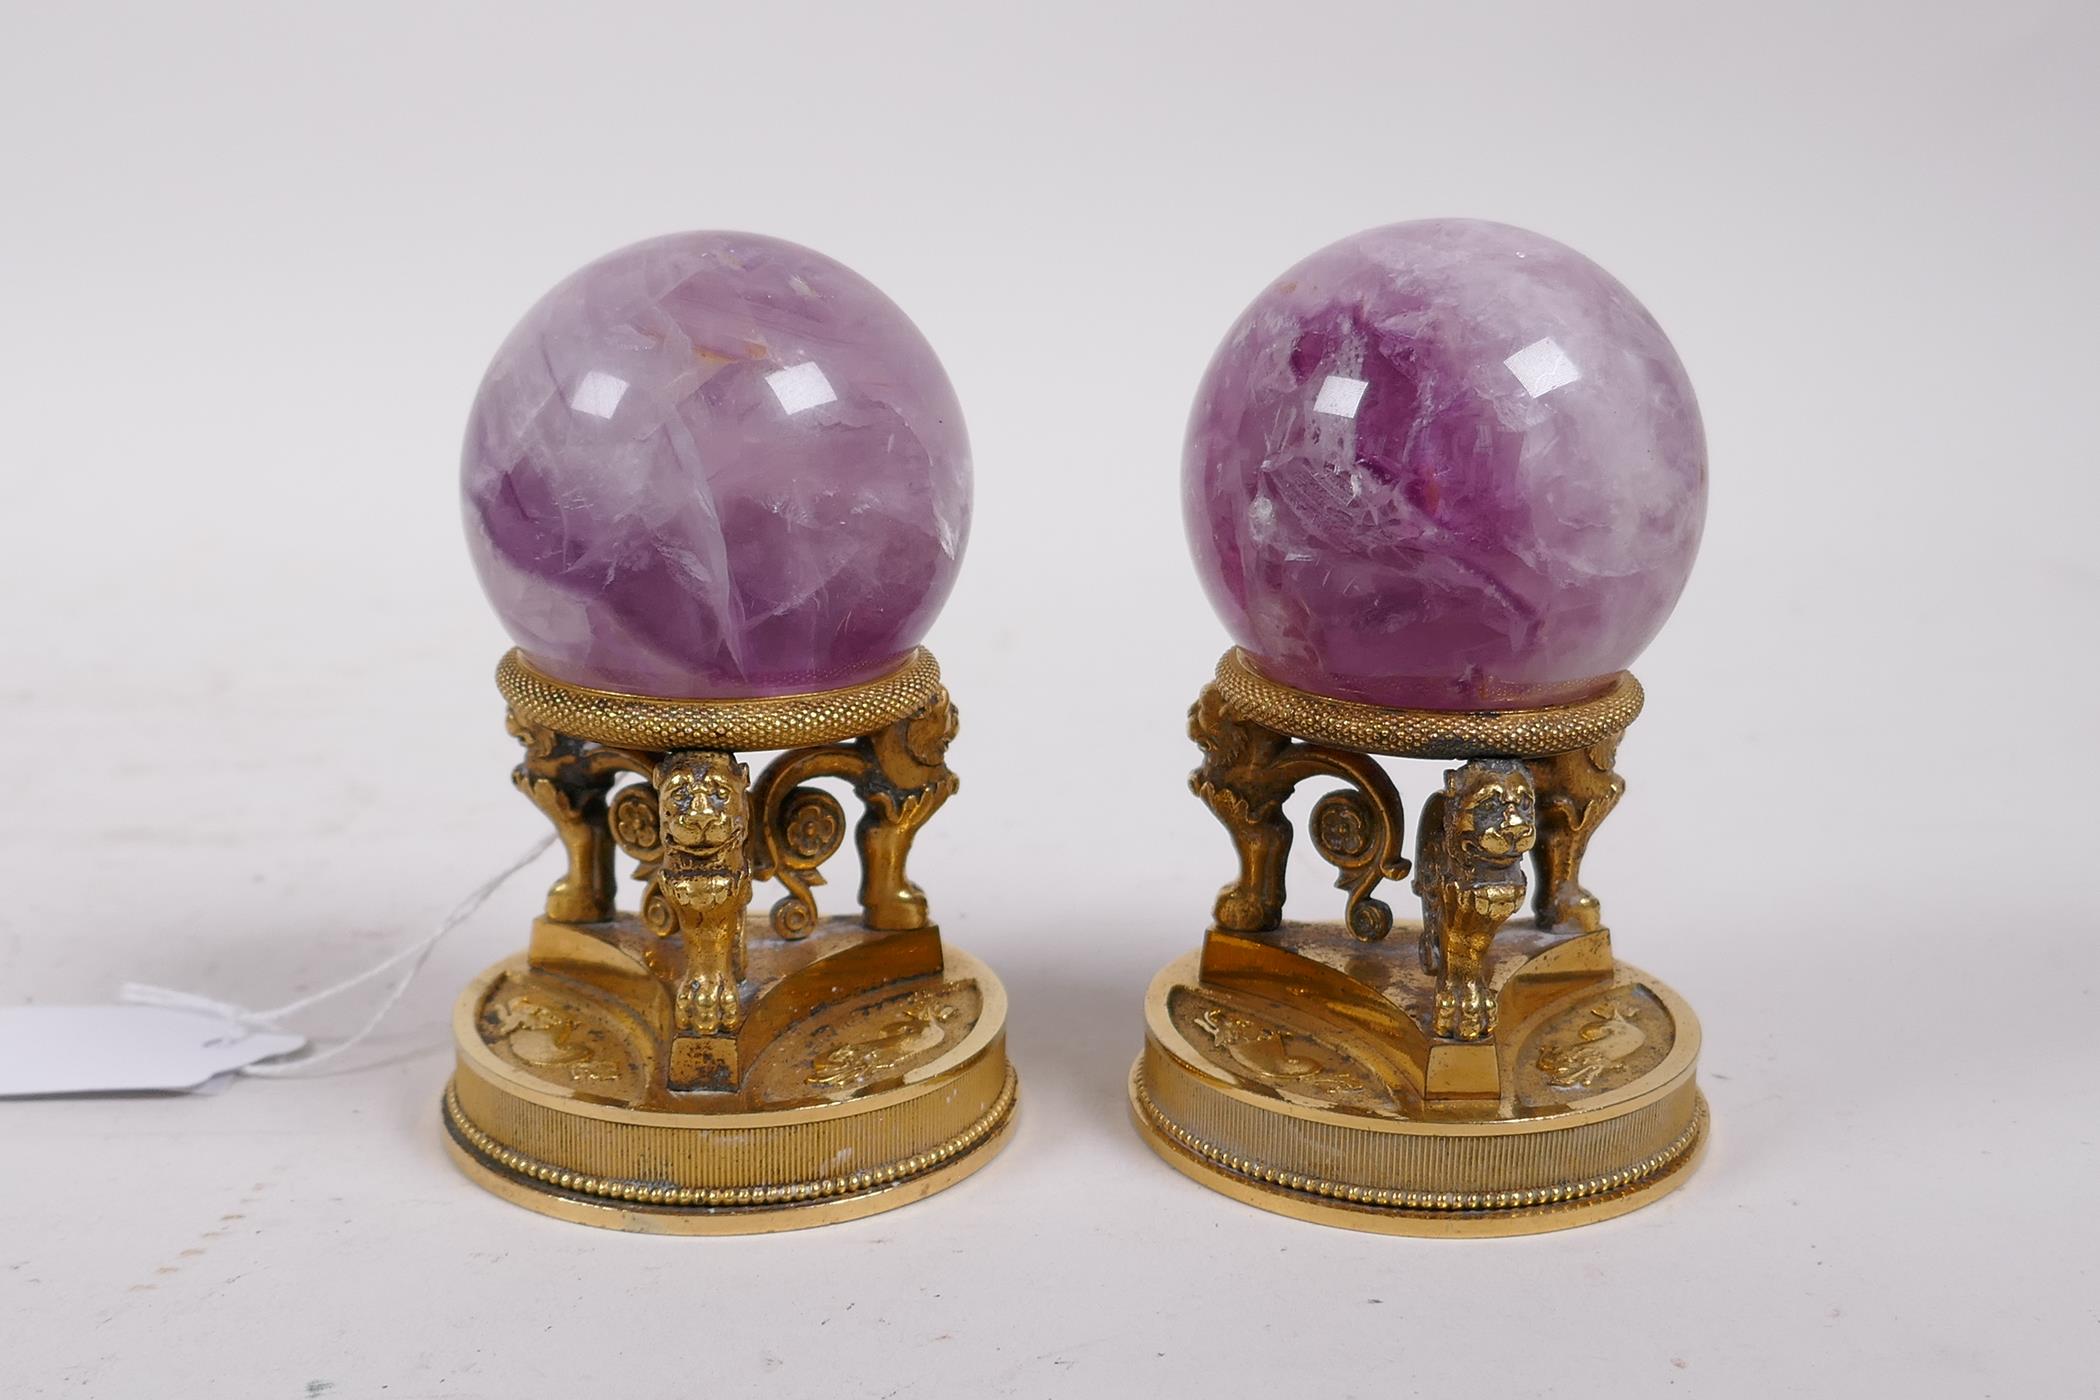 A pair of ormolu stands with lion supports, inset with crystal balls, 4" high - Image 3 of 4